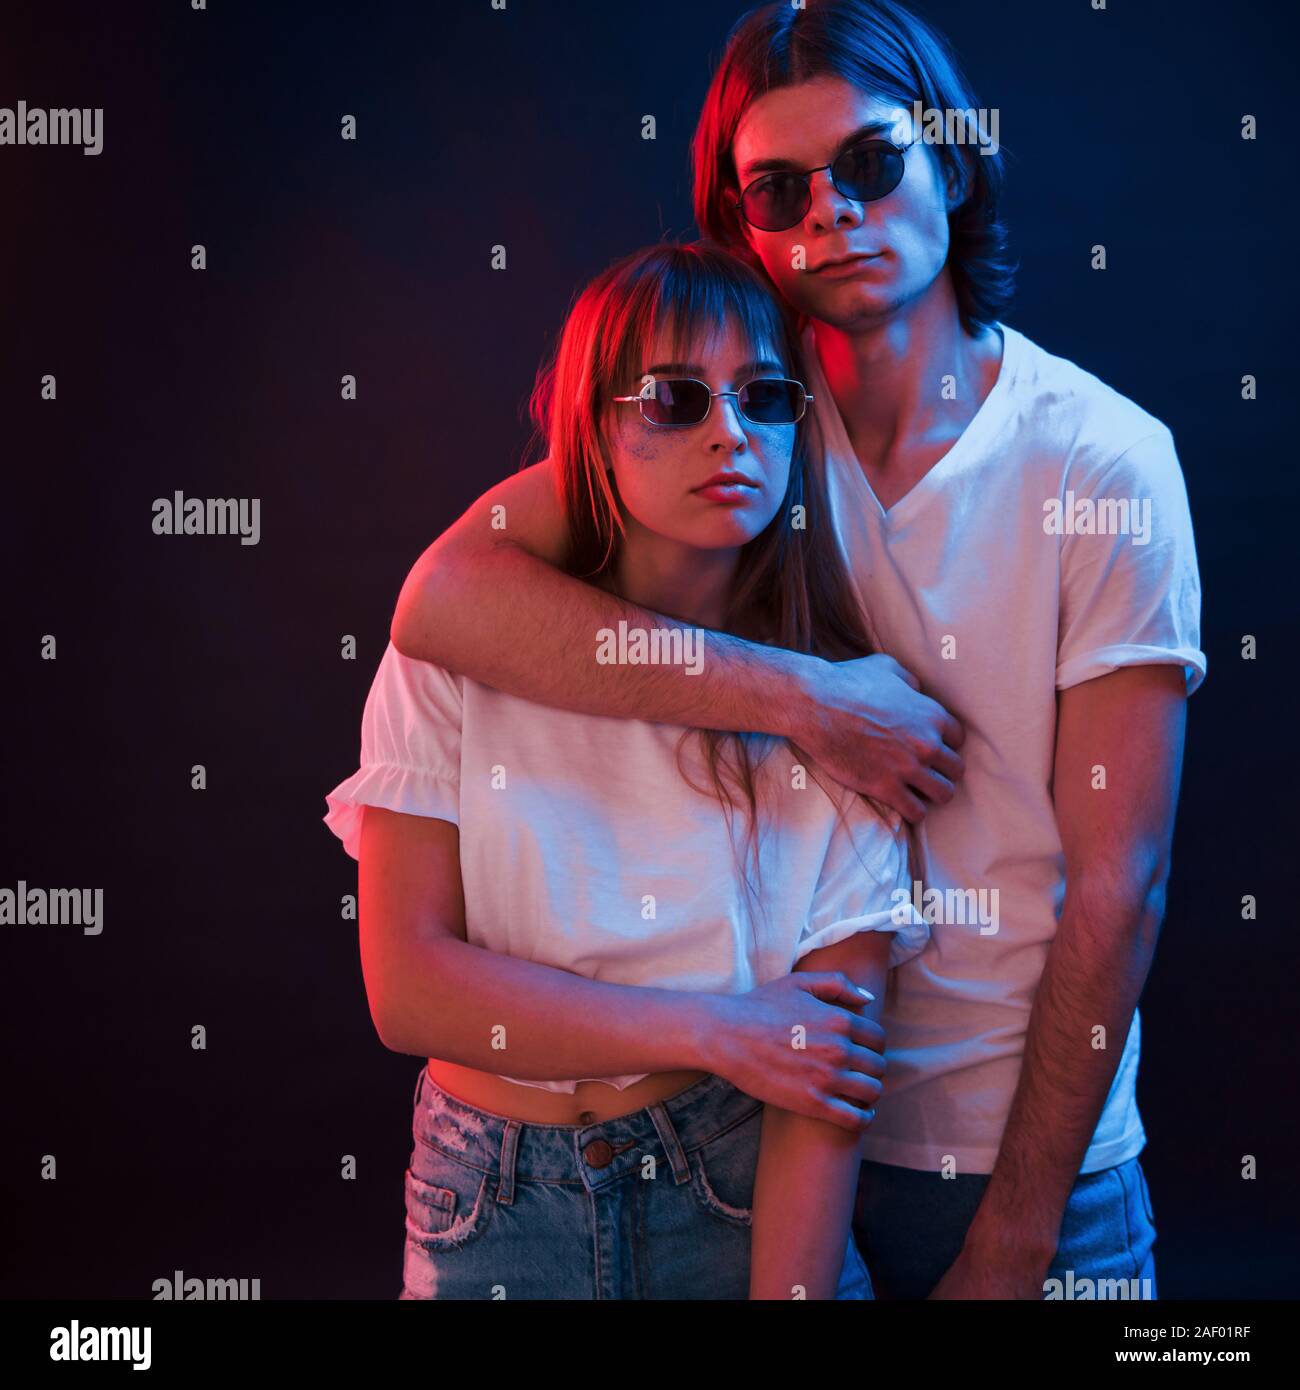 Pure love. Couple standing in dark room with red and blue neon lighting Stock Photo